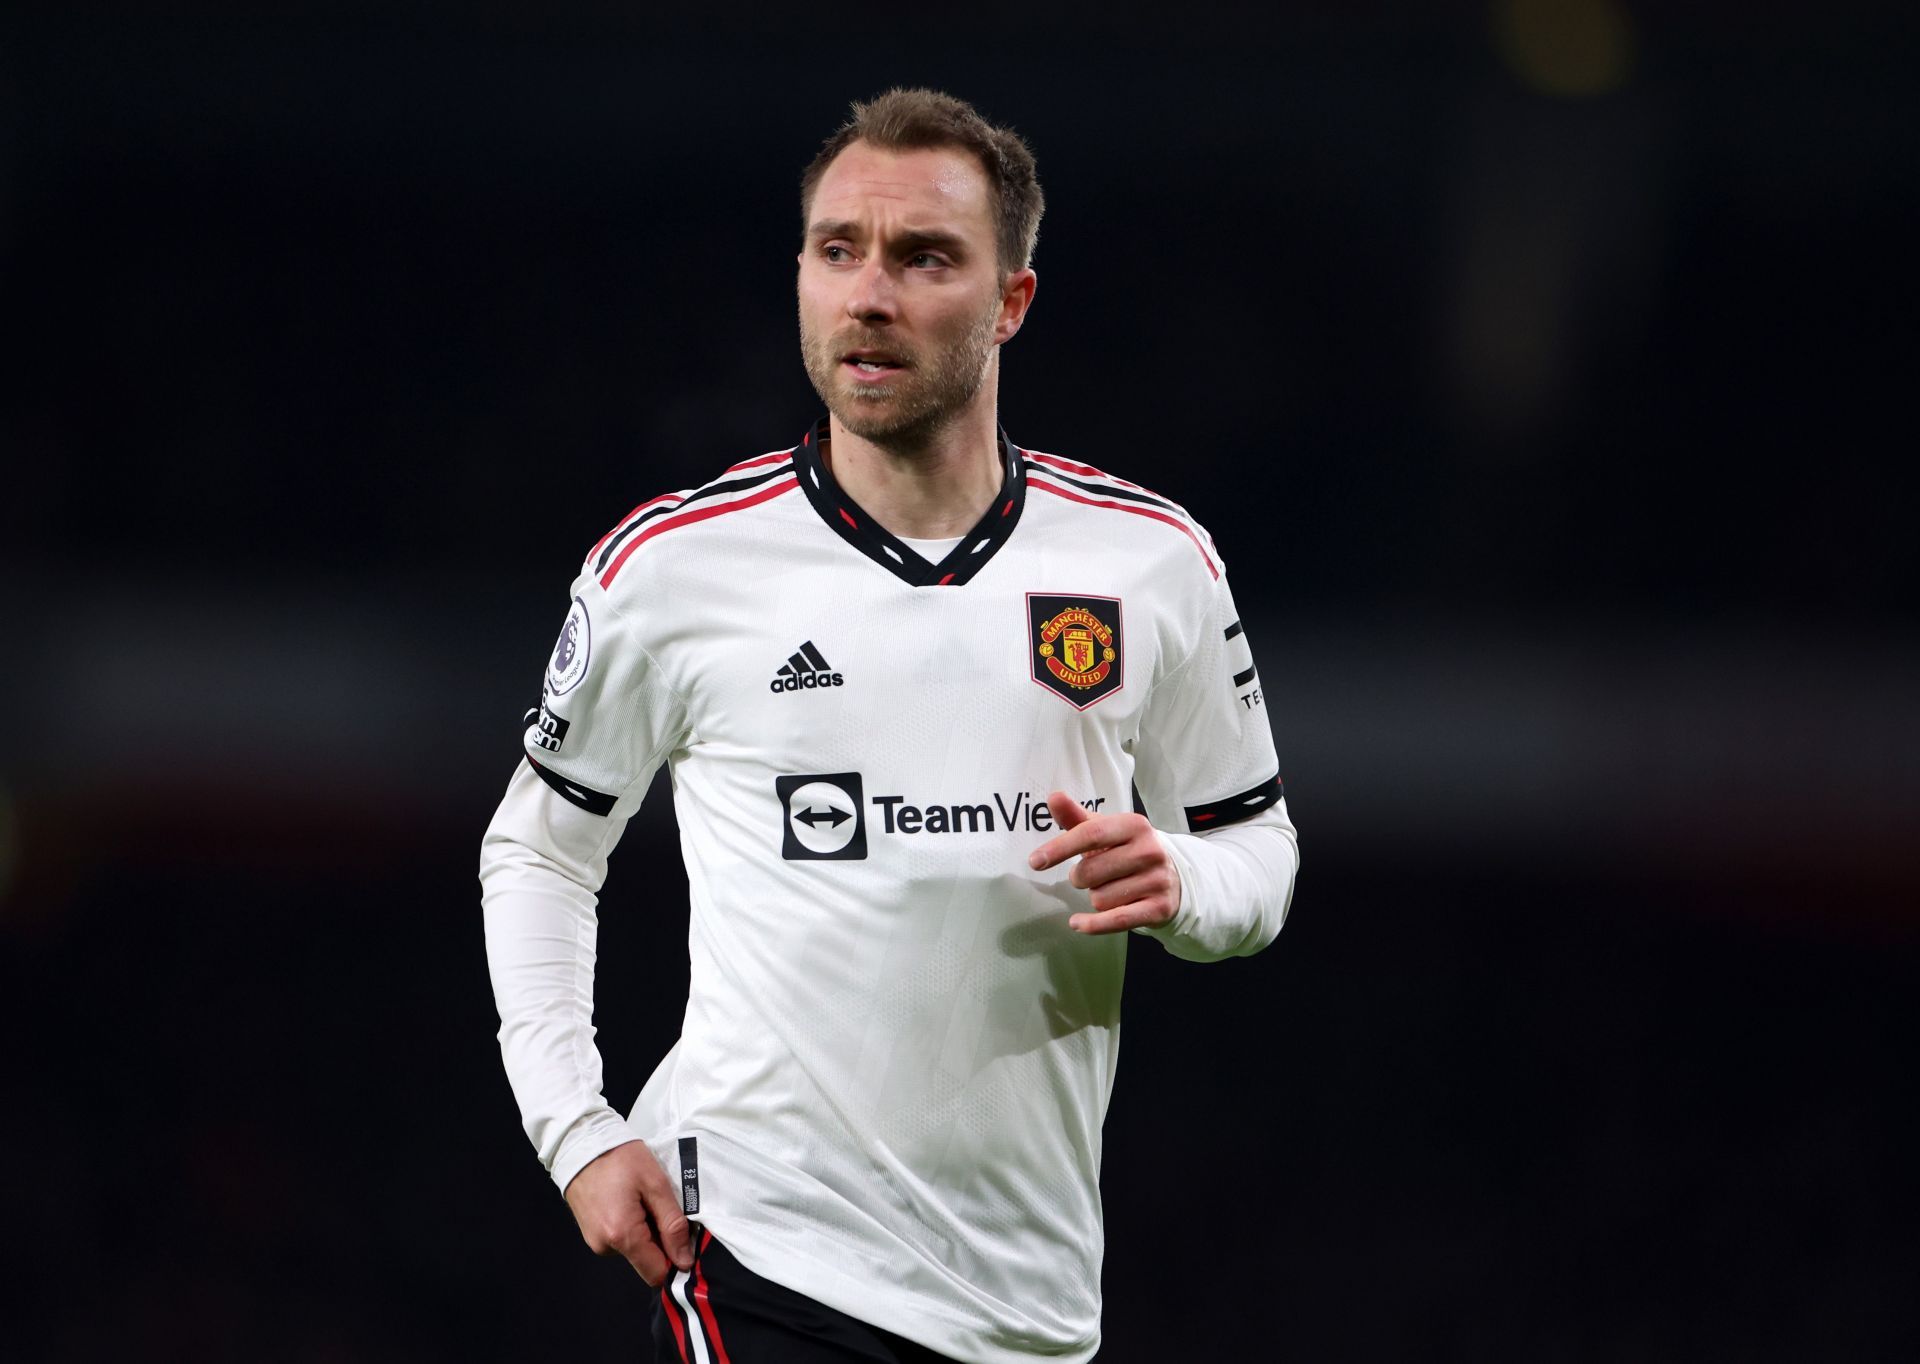 Christian Eriksen could feature against the Toffees.